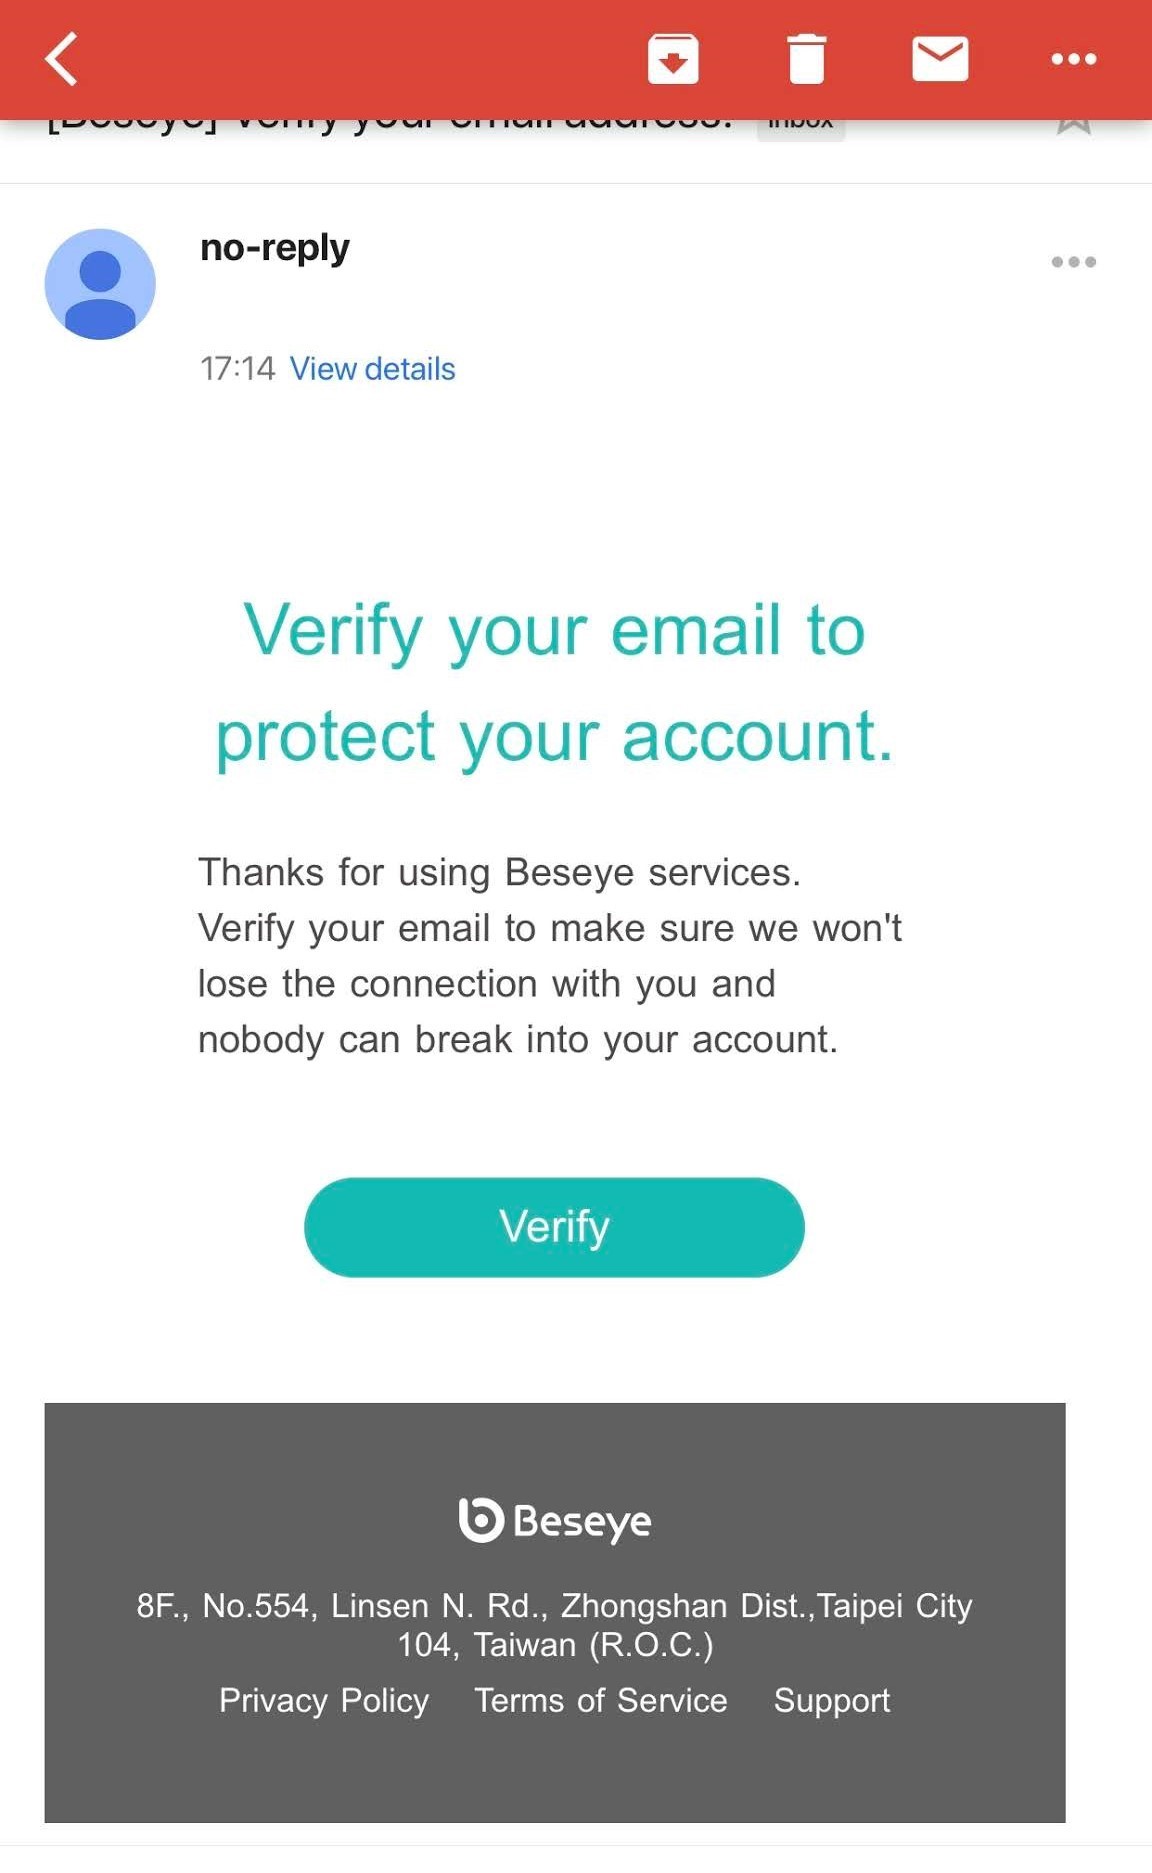 verify_your_email.jpg